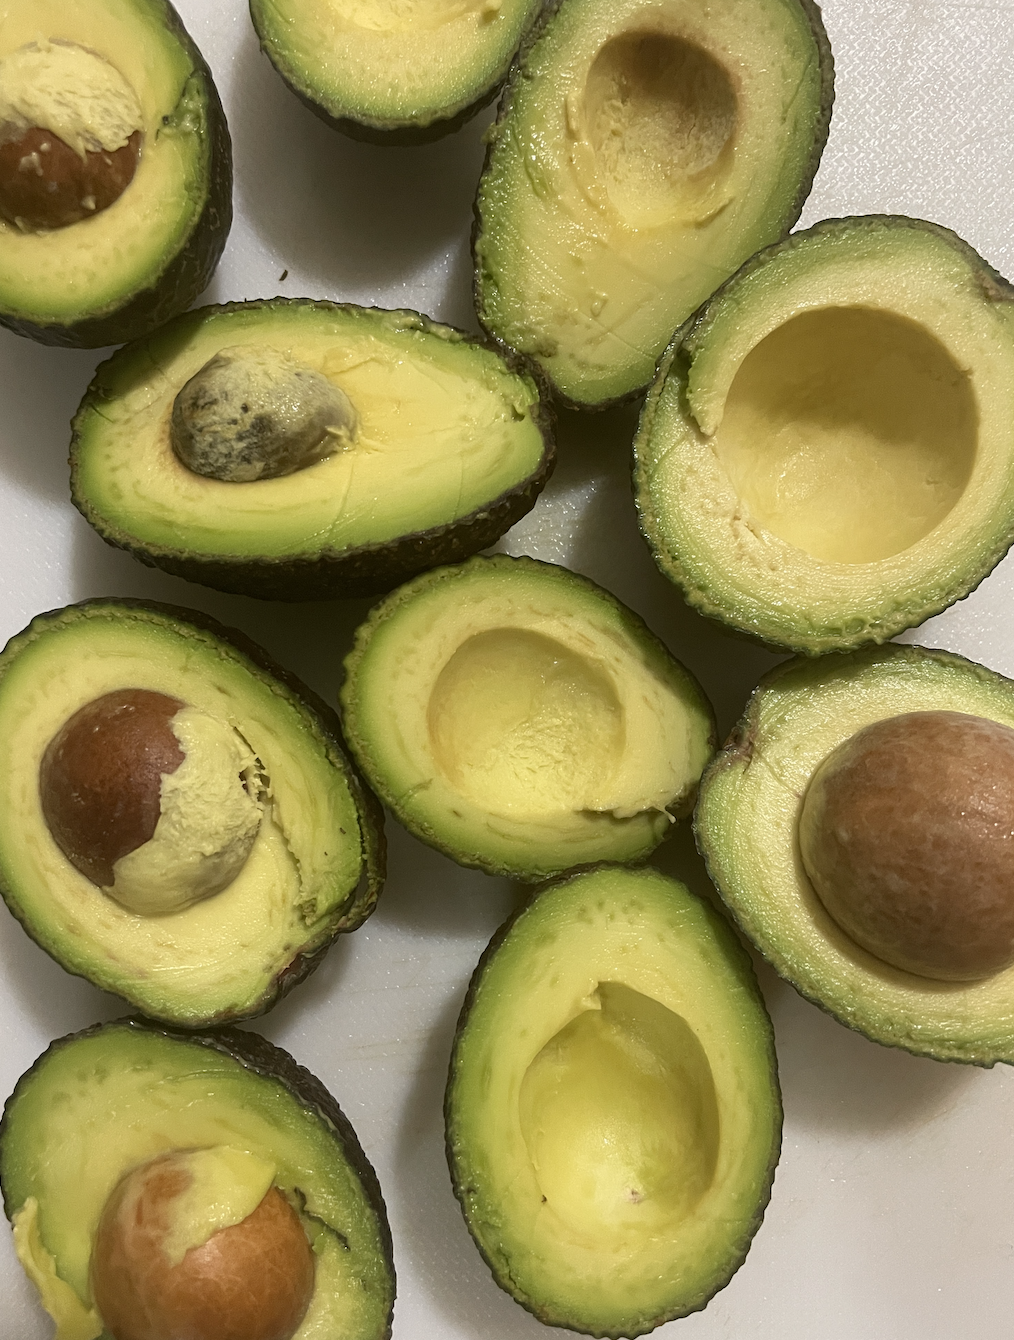 Halved, ripe avocados, some with the pits still inside them